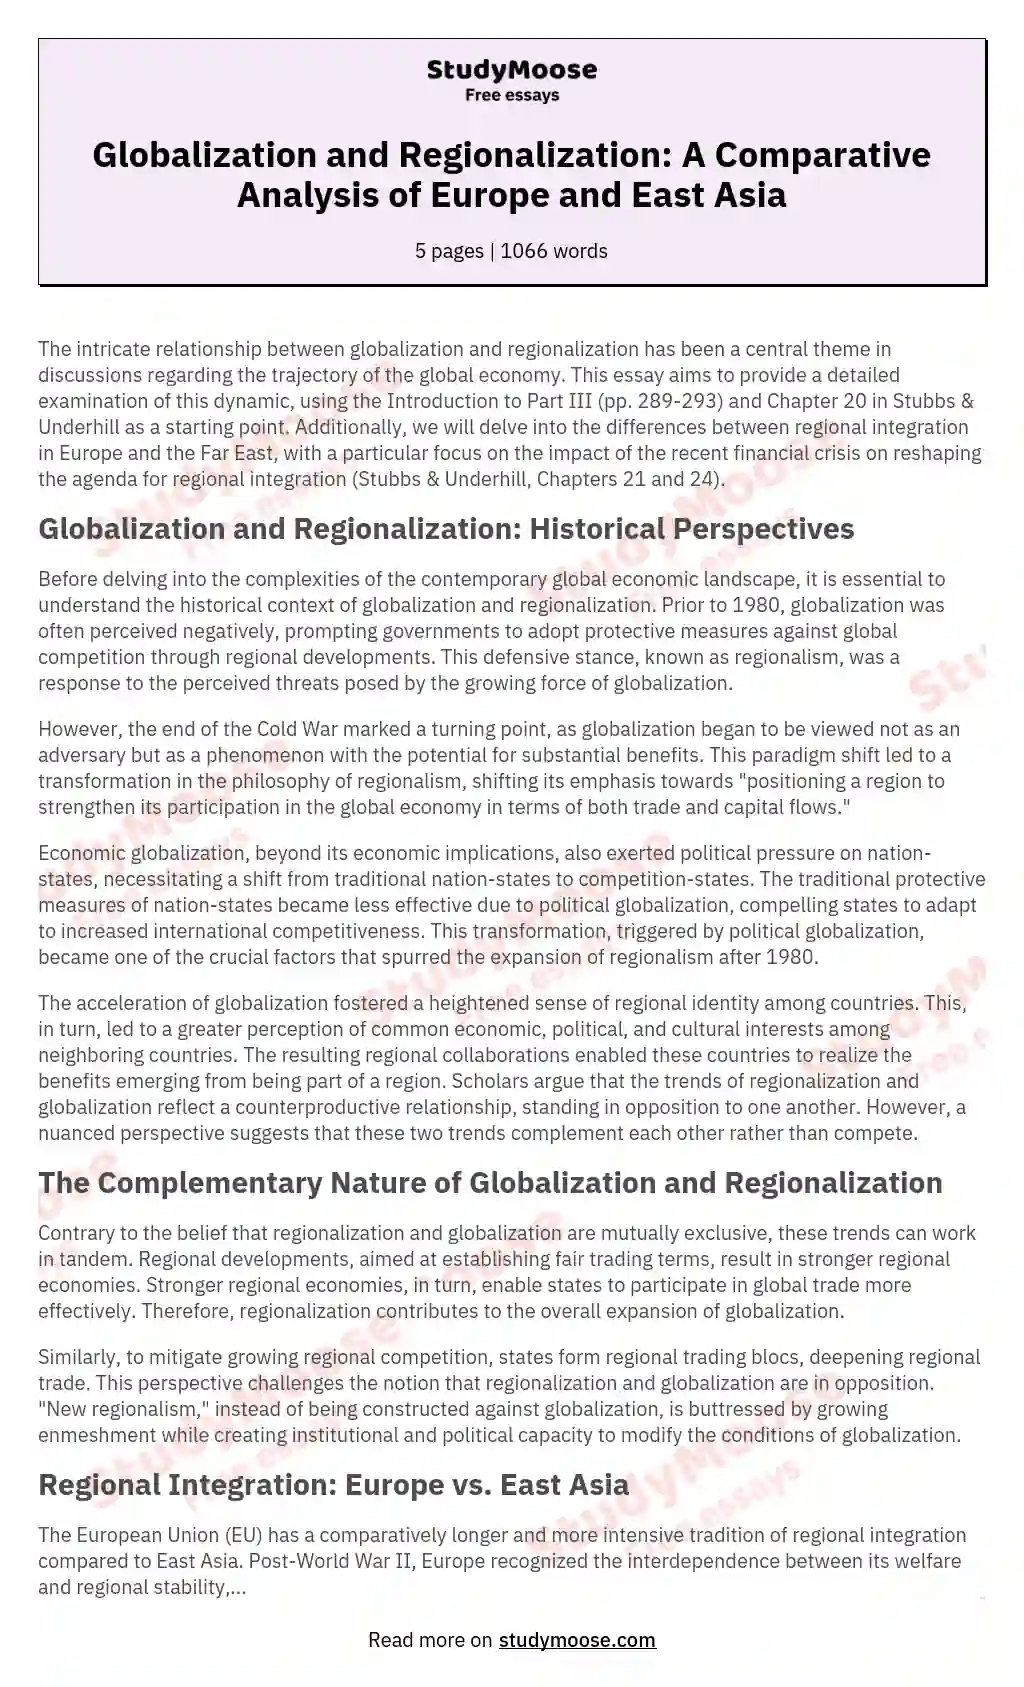 Globalization and Regionalization: A Comparative Analysis of Europe and East Asia essay